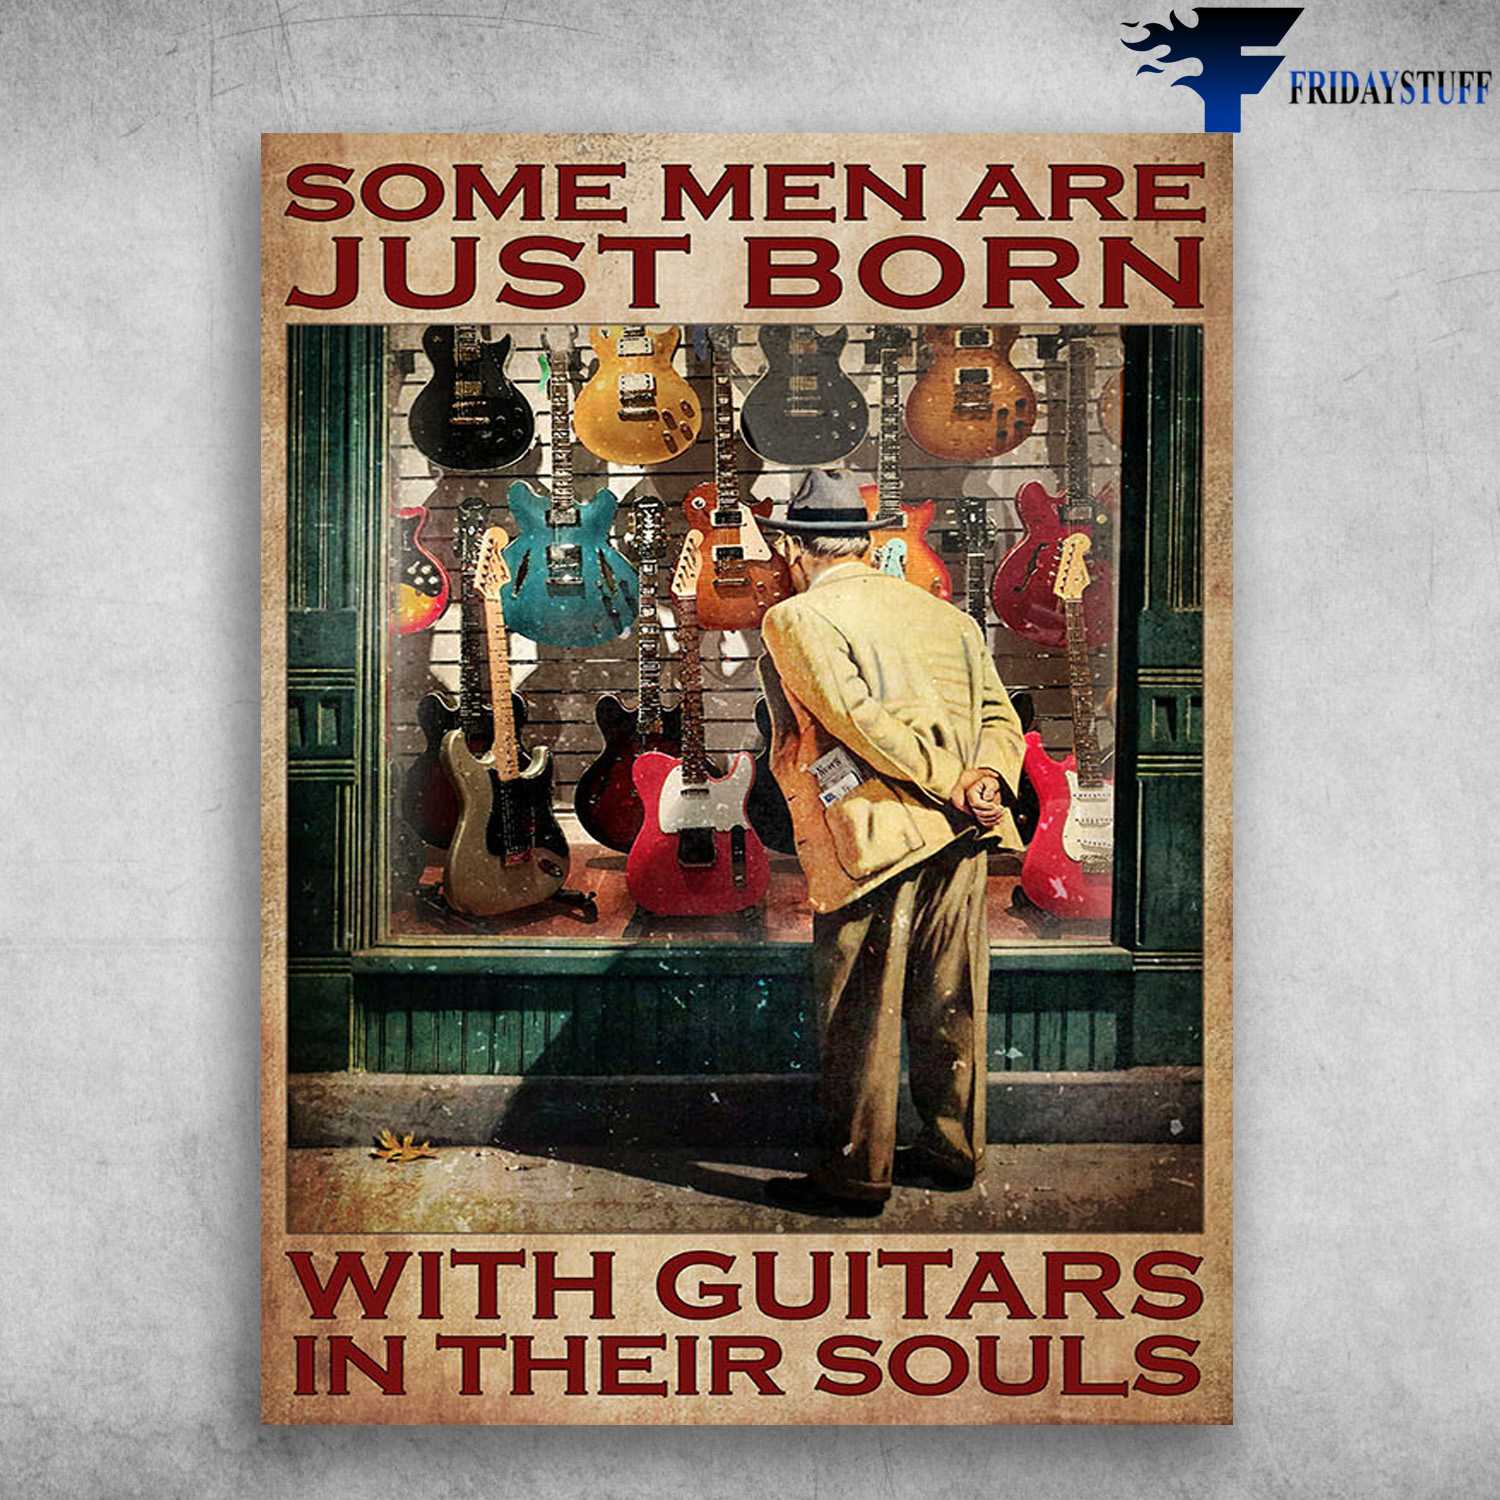 Old Man Guitar, Guitar Lover - Some Men Are Just Born, With Guitars In Their Souls